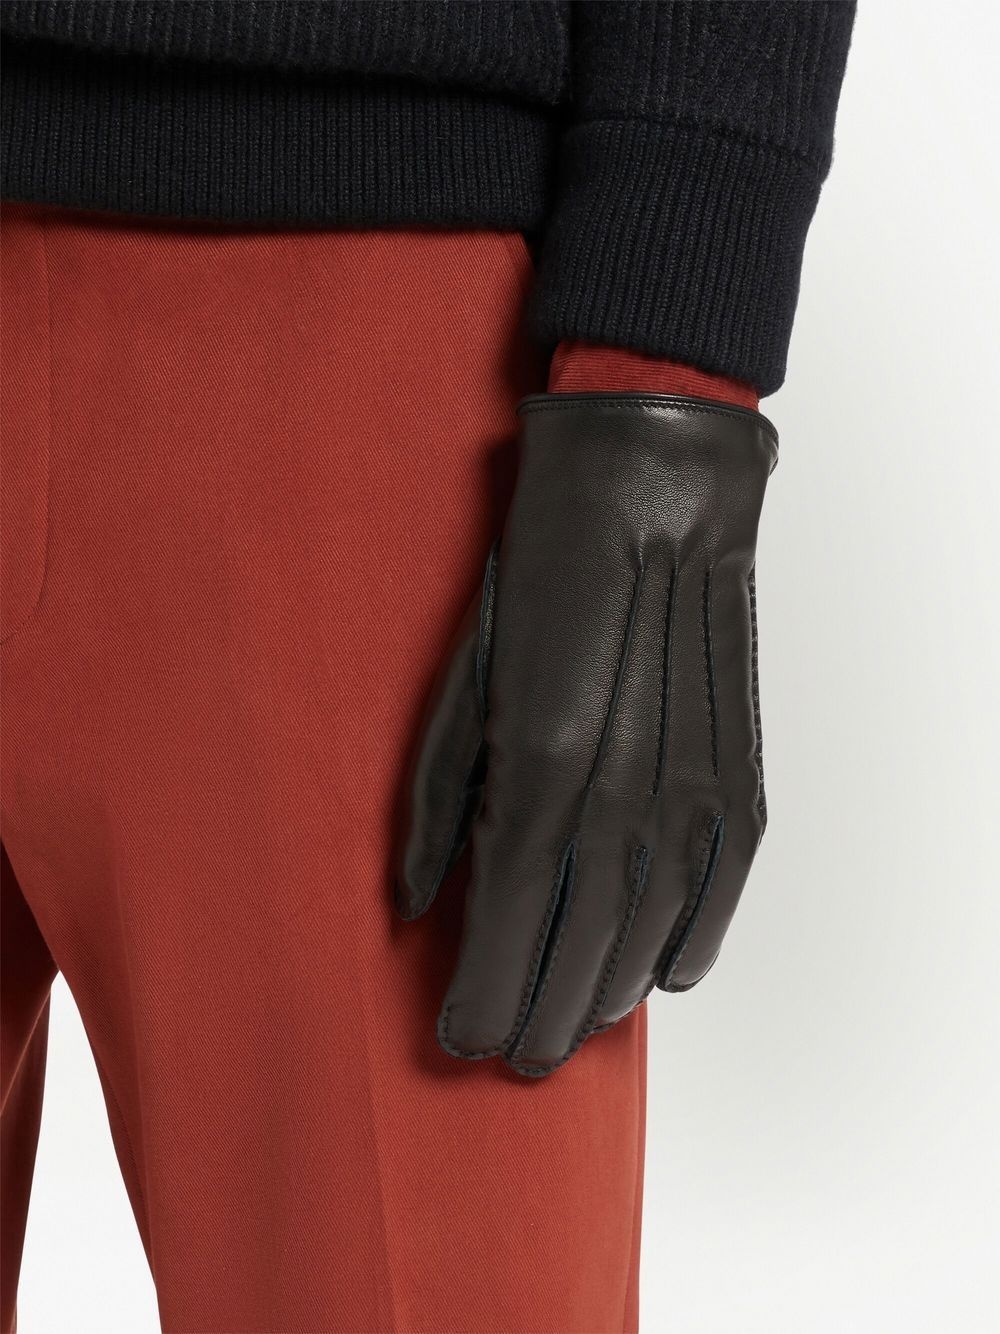 cashmere-lined leather gloves - 3